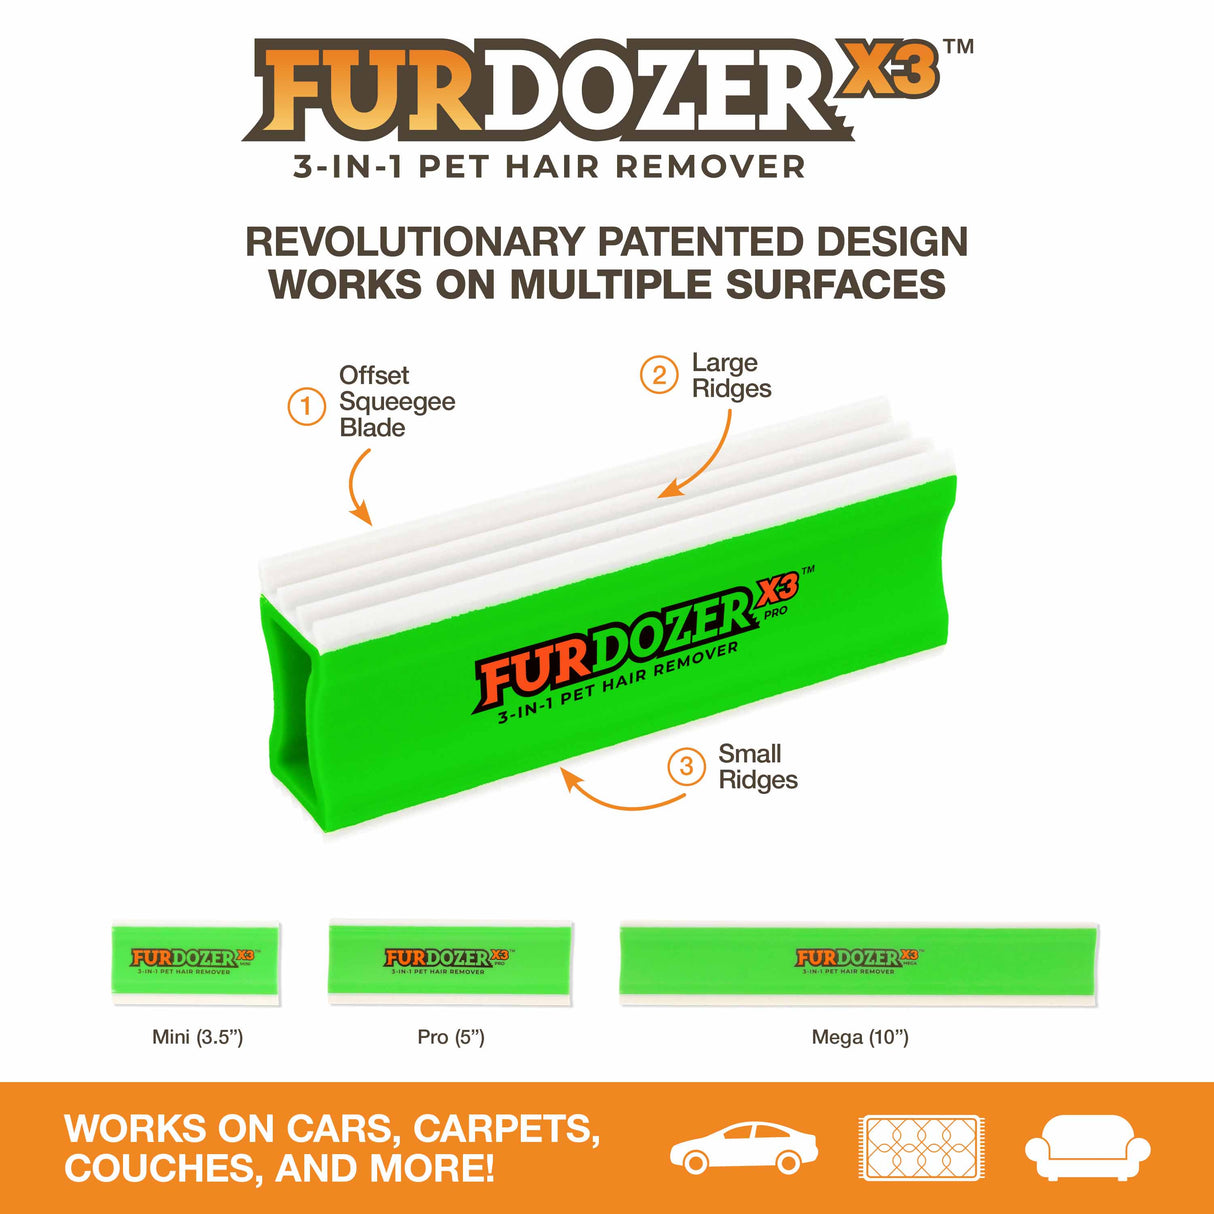 Diagram showing the different features of the FurDozer X3 PRO